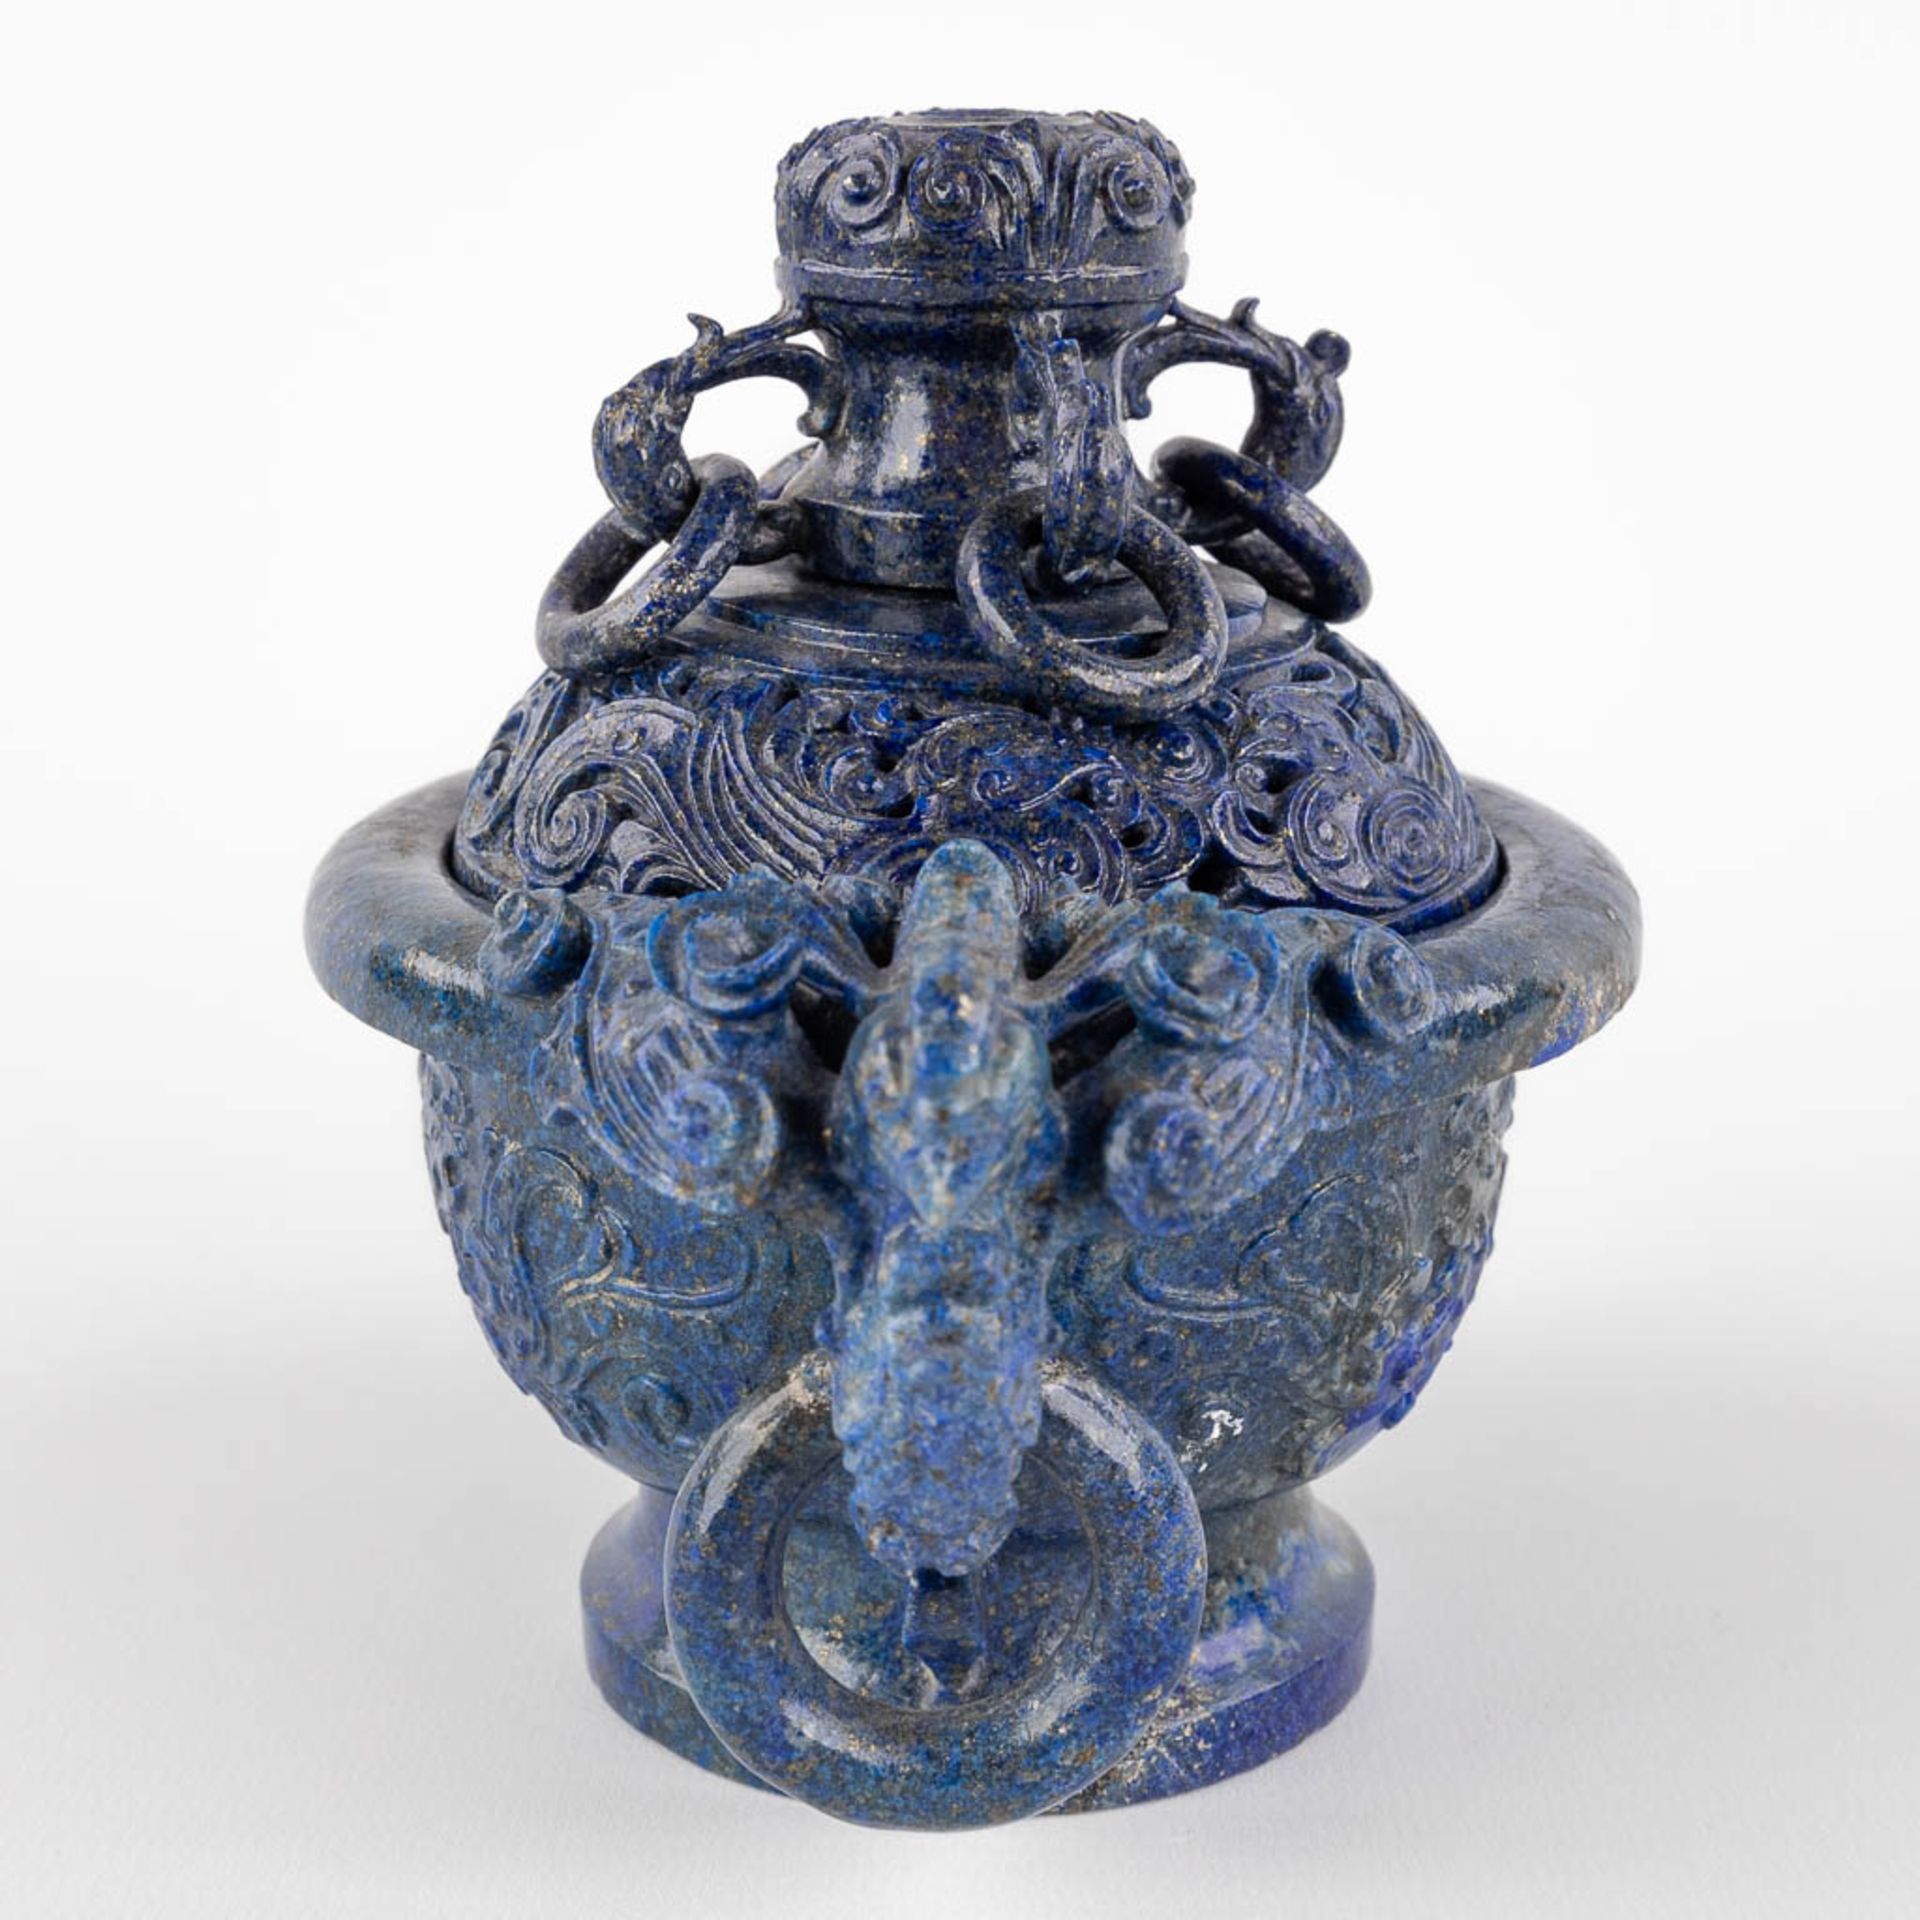 A Chinese censer, sculptured Lapis Lazuli, decorated with birds and flowers. (D:11 x W:17 x H:14 cm) - Image 4 of 11